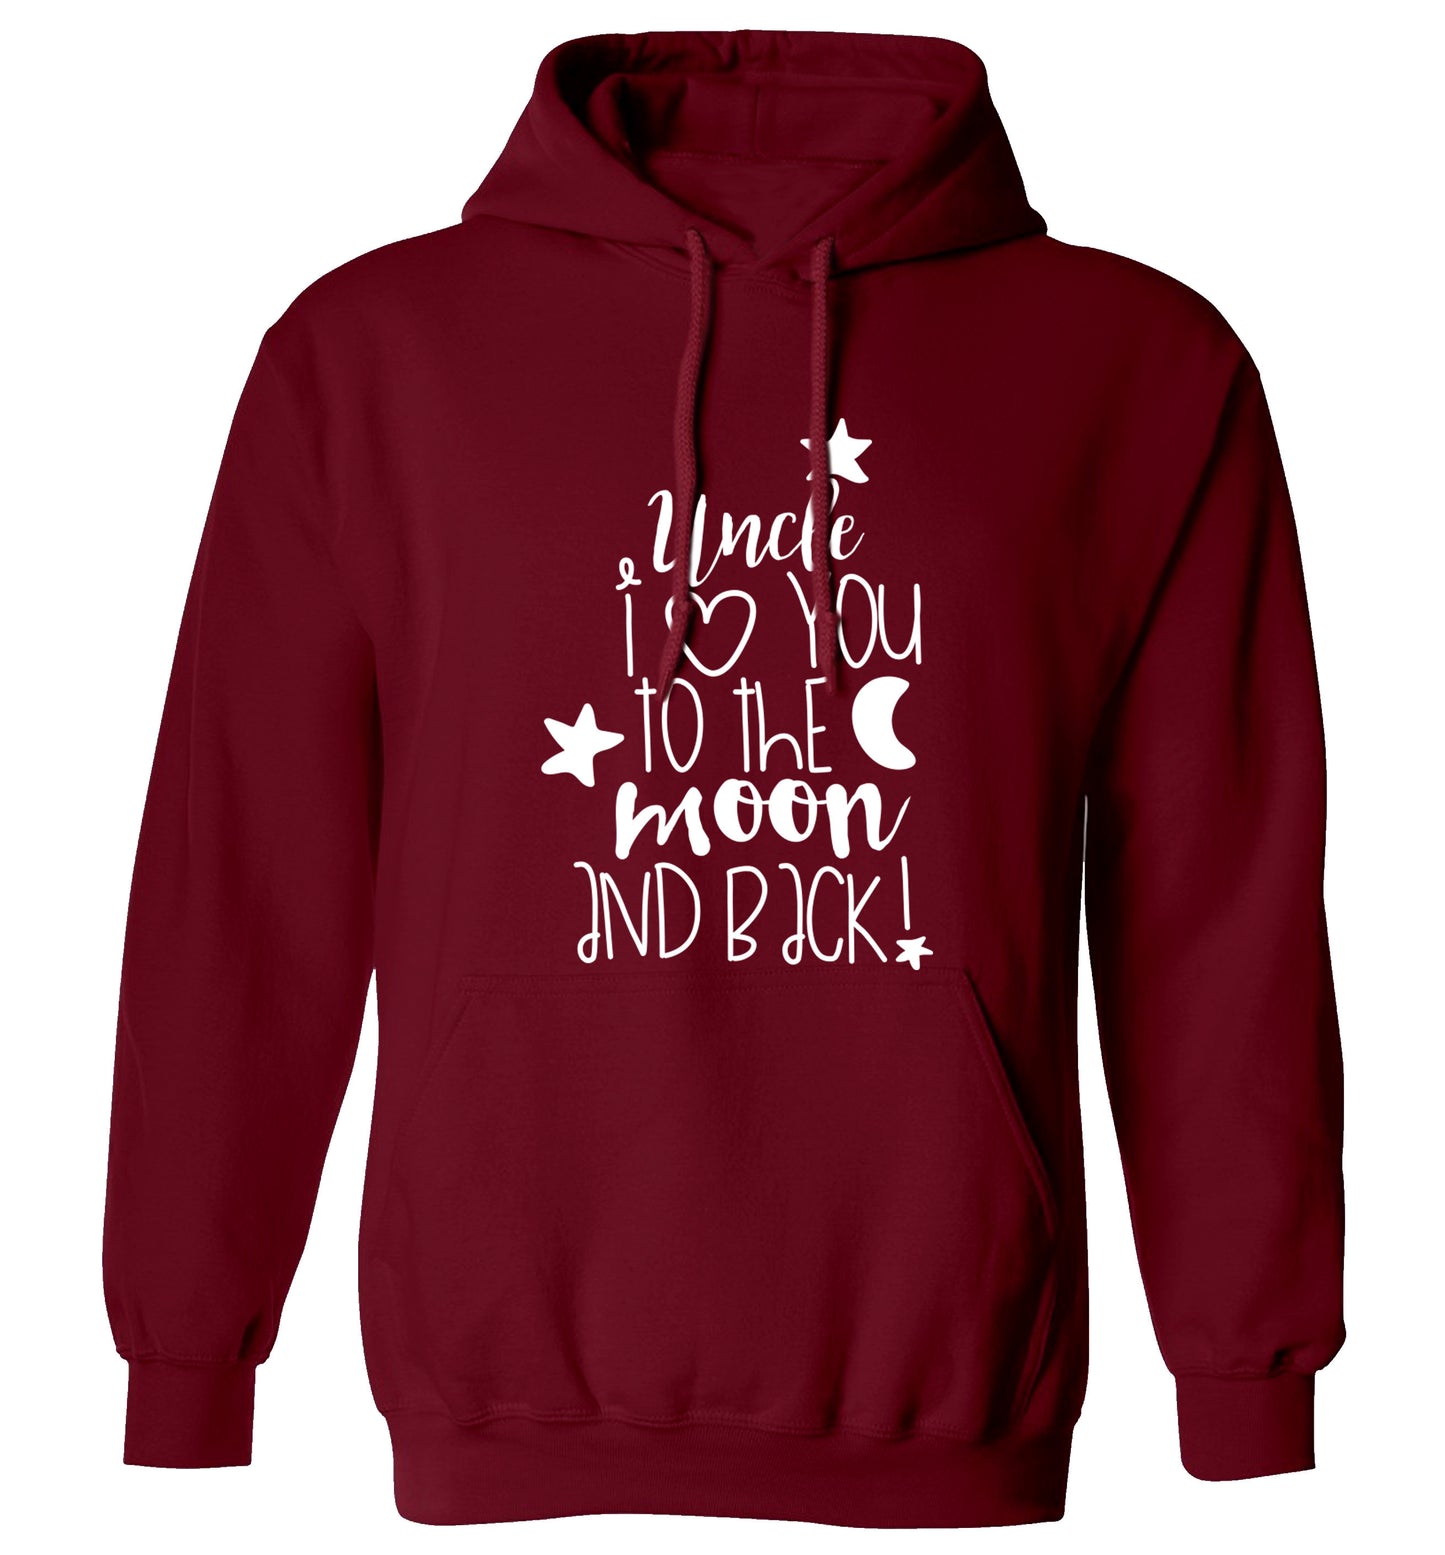 Uncle I love you to the moon and back adults unisex maroon hoodie 2XL